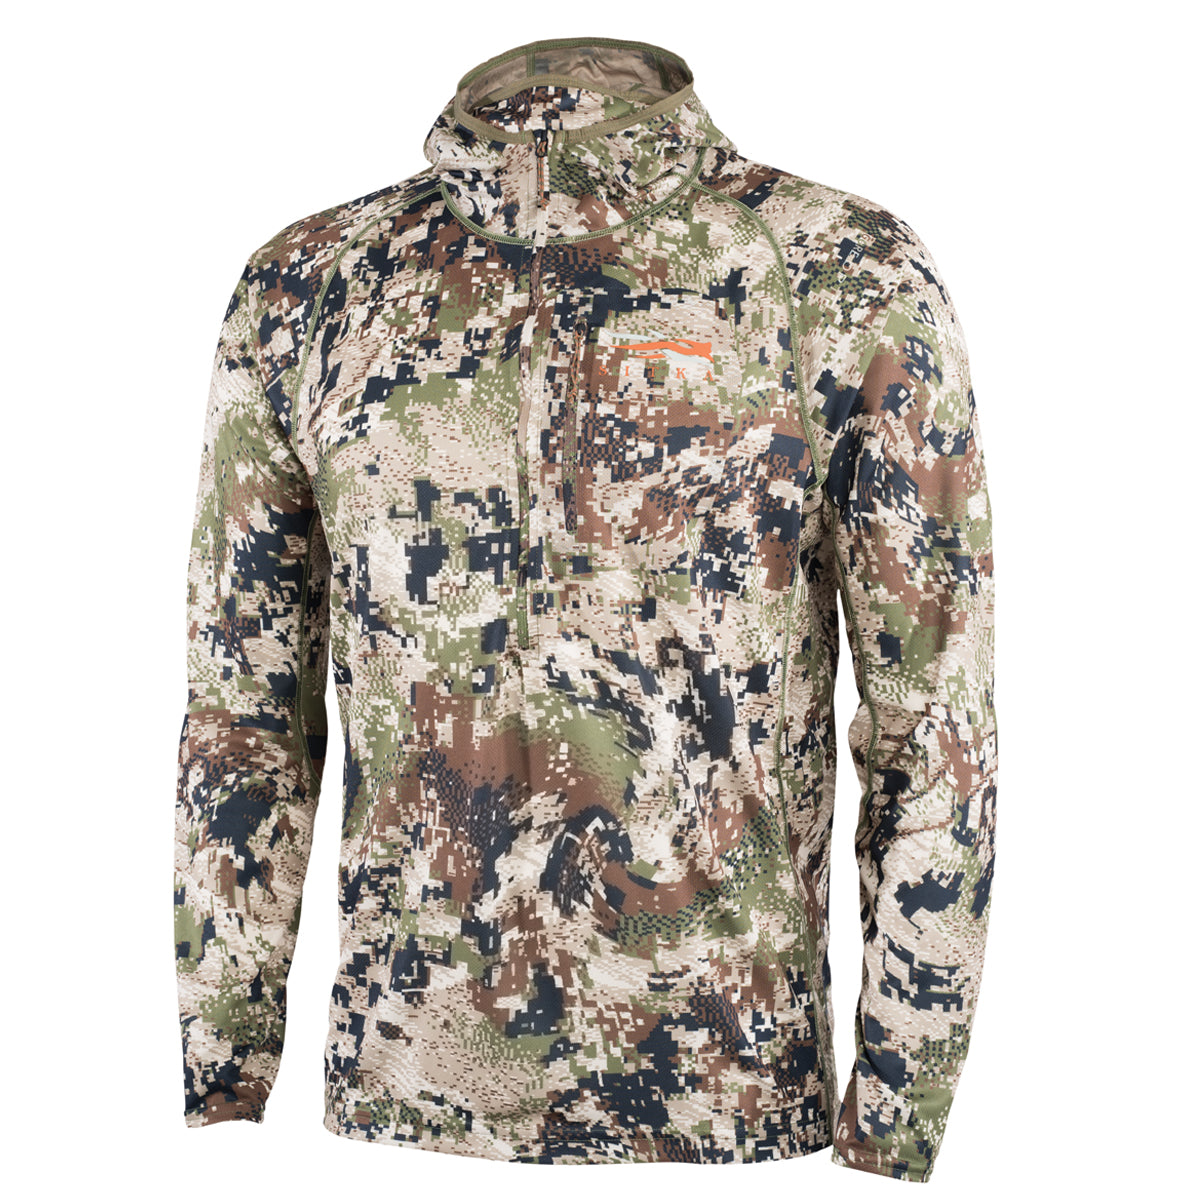 Sitka Core Lightweight Hoody by Sitka | Apparel - goHUNT Shop